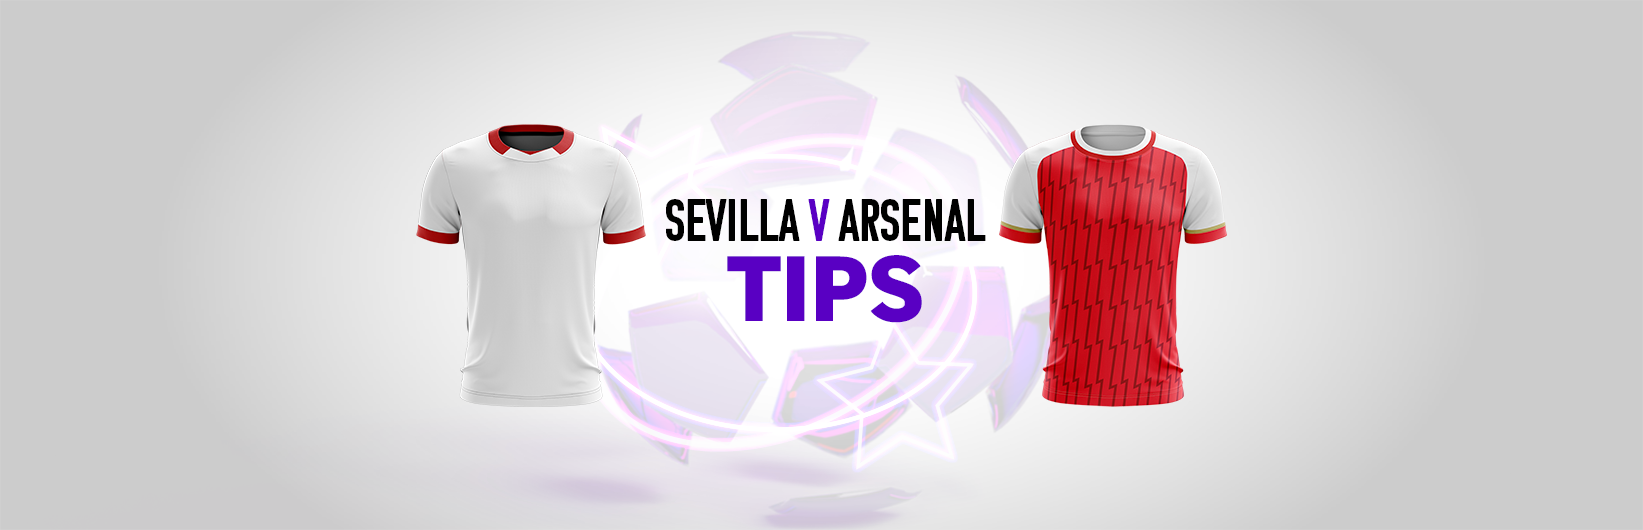 Champions League tips: Best bets for Sevilla v Arsenal